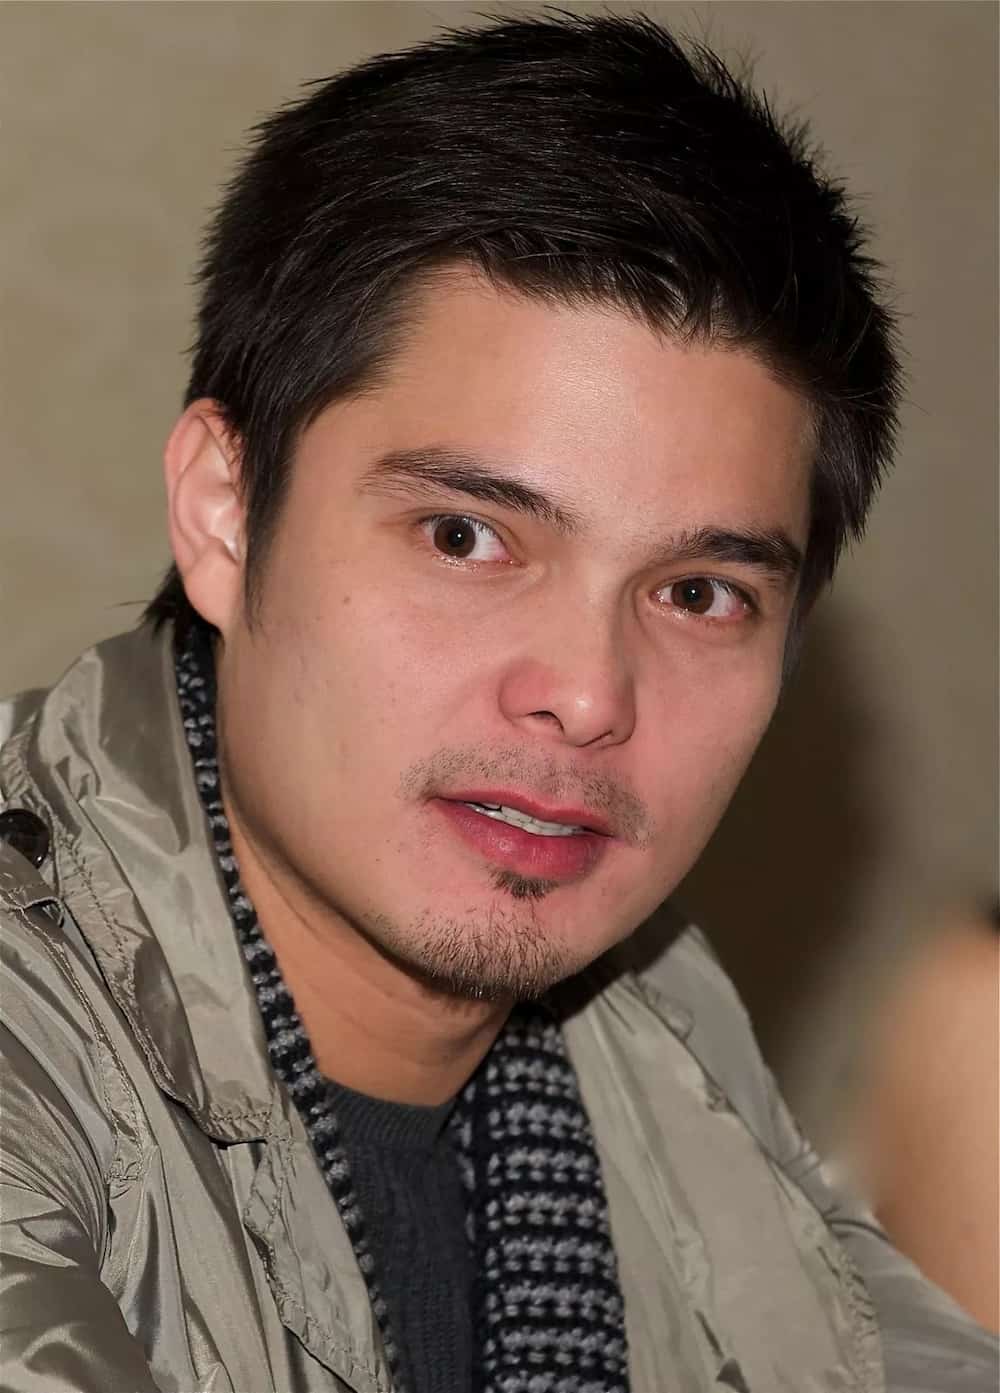 National Youth Commission Says DingDong Dantes Has Not Resigned